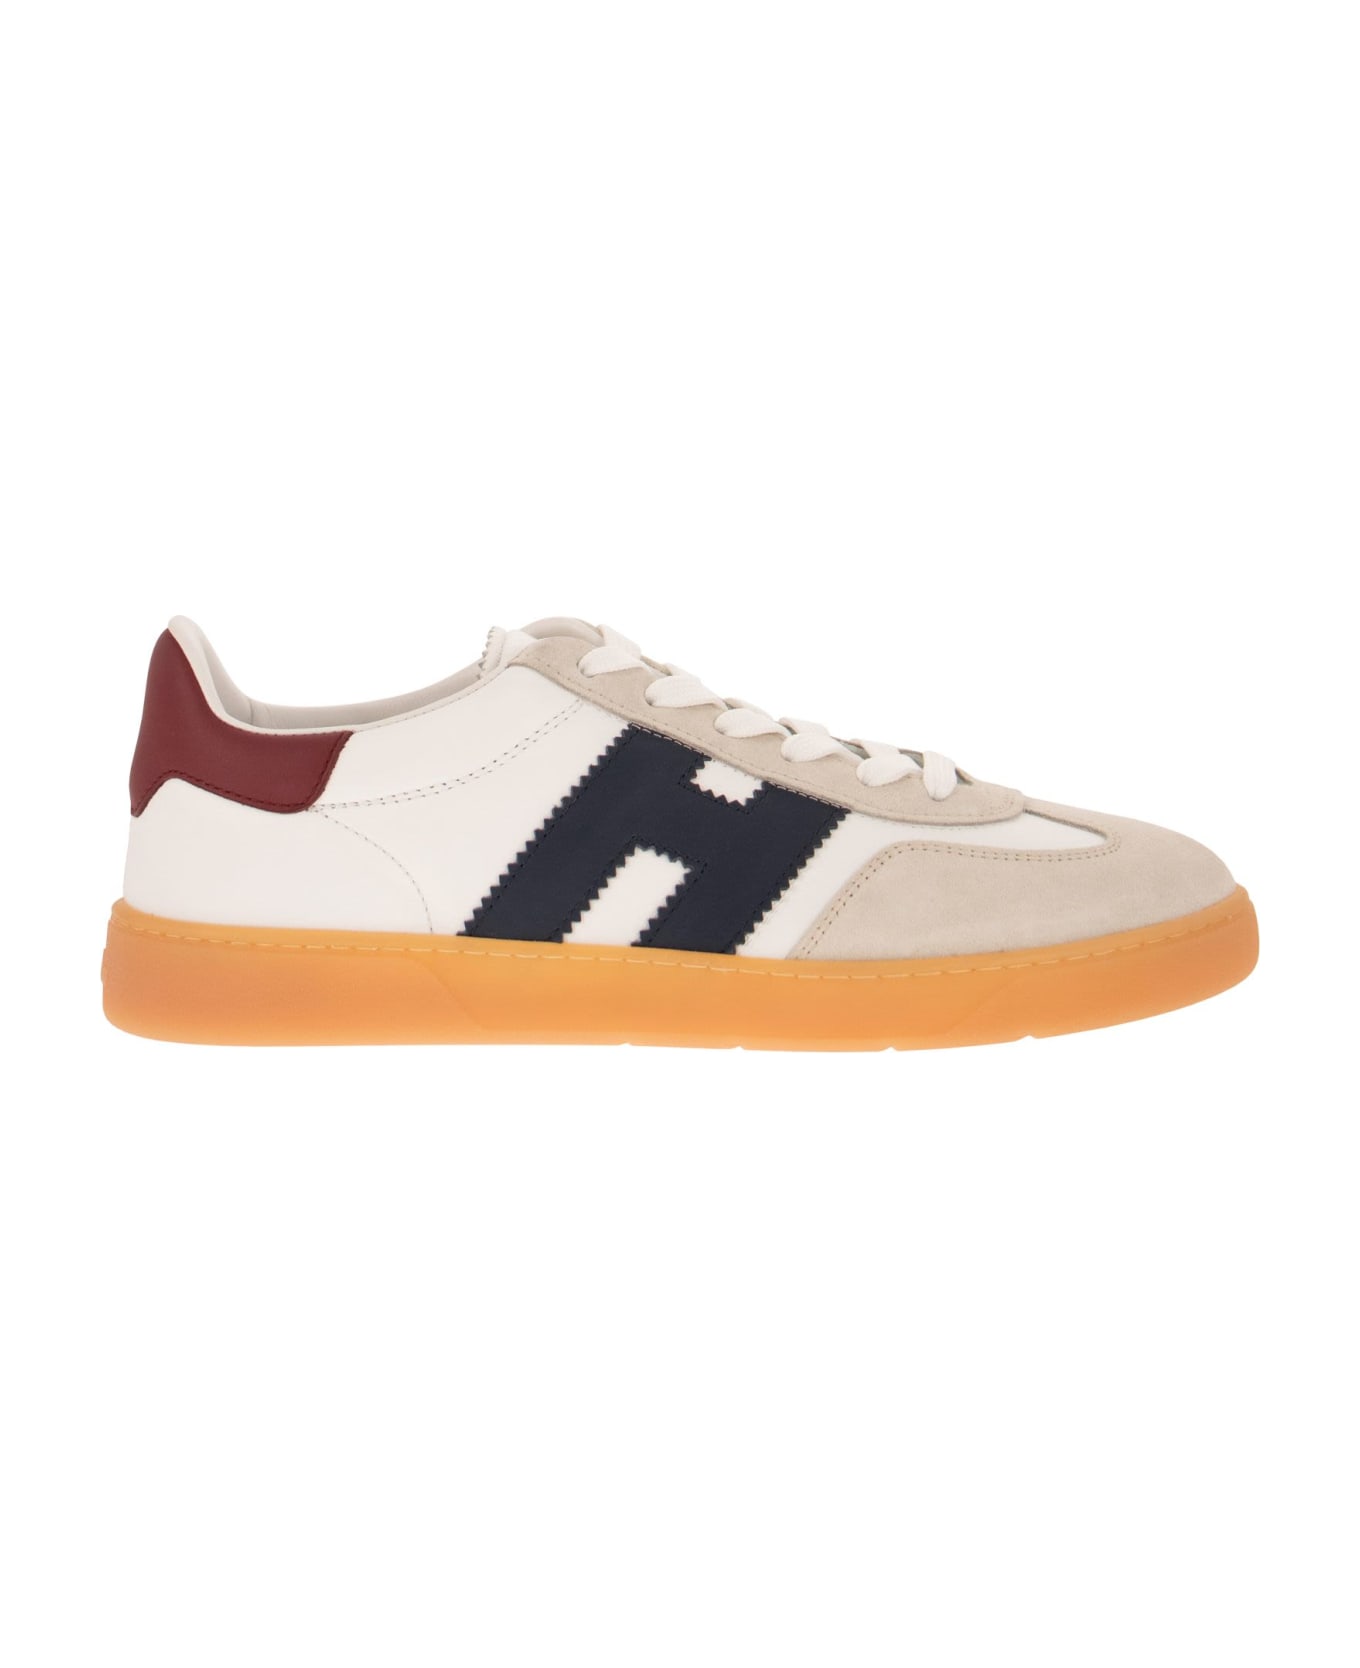 Hogan Cool Sneakers In Leather And Suede - White スニーカー